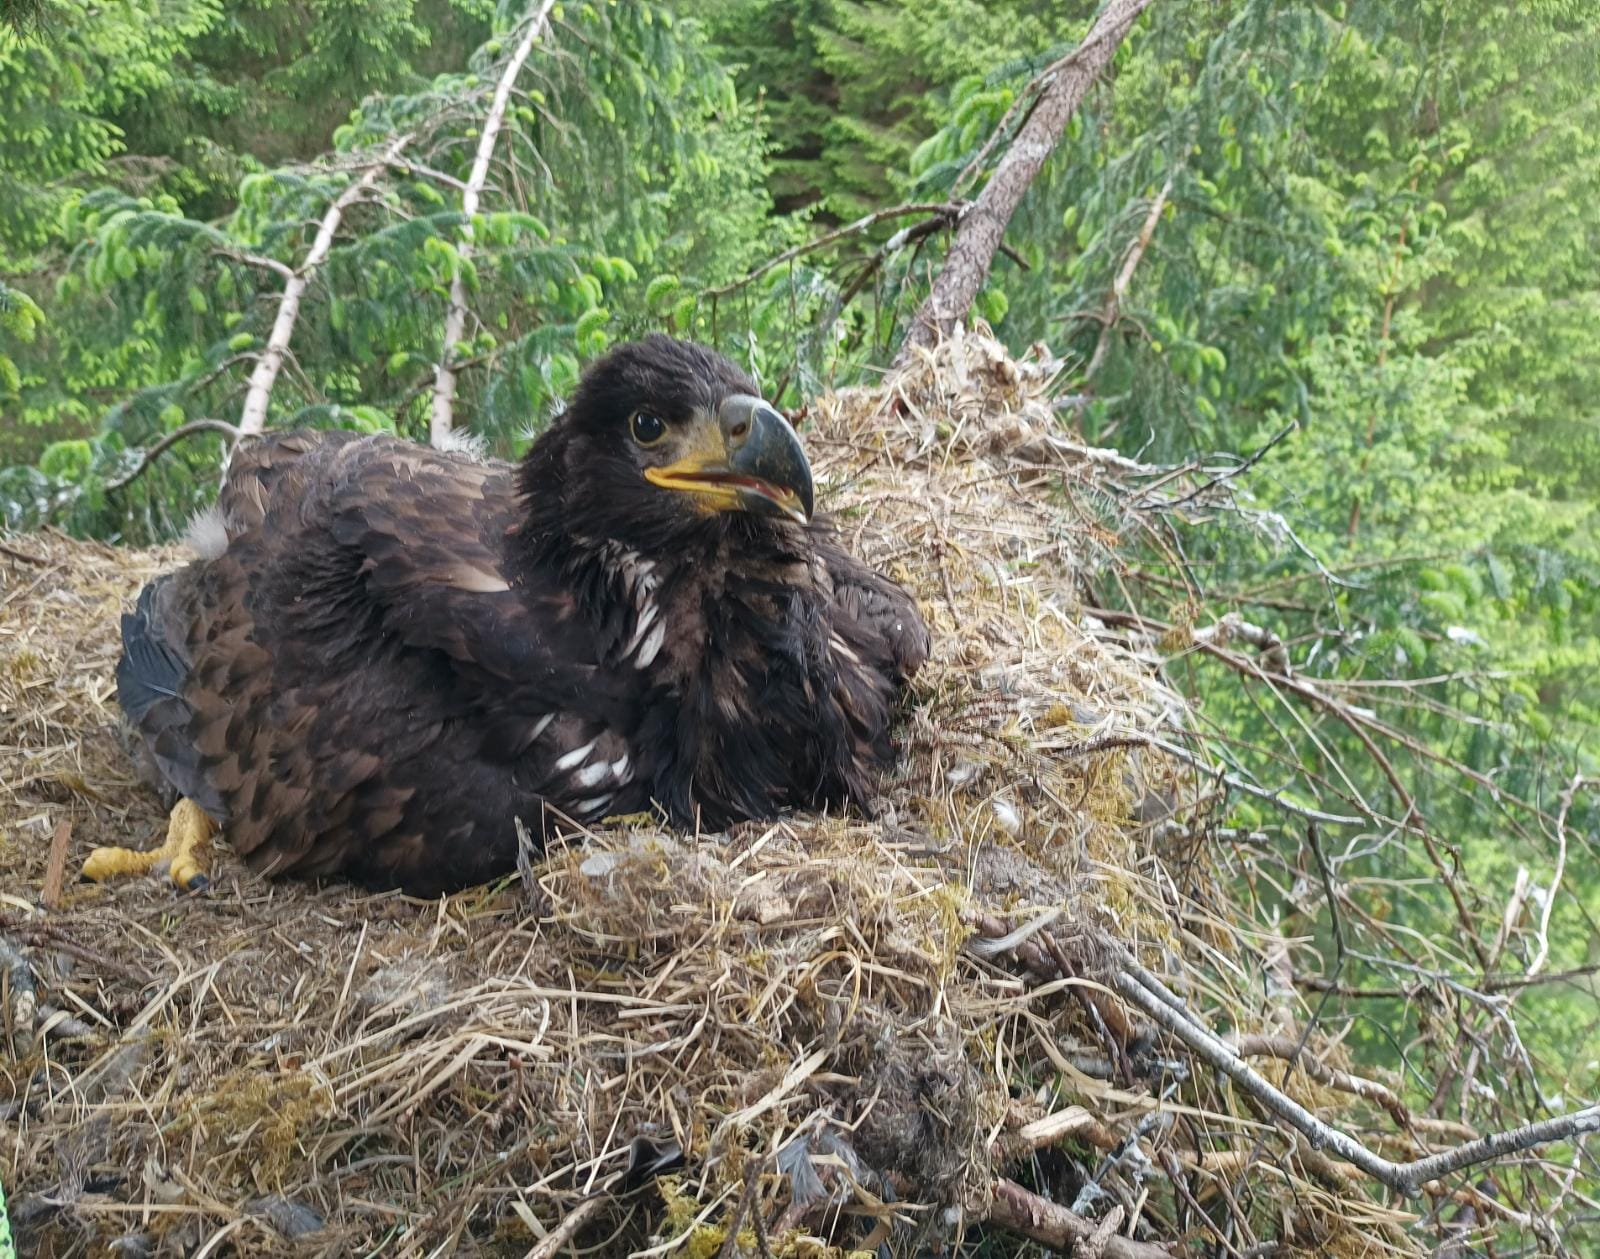 The chick is believed to be female (Pic: Steve Bentall)